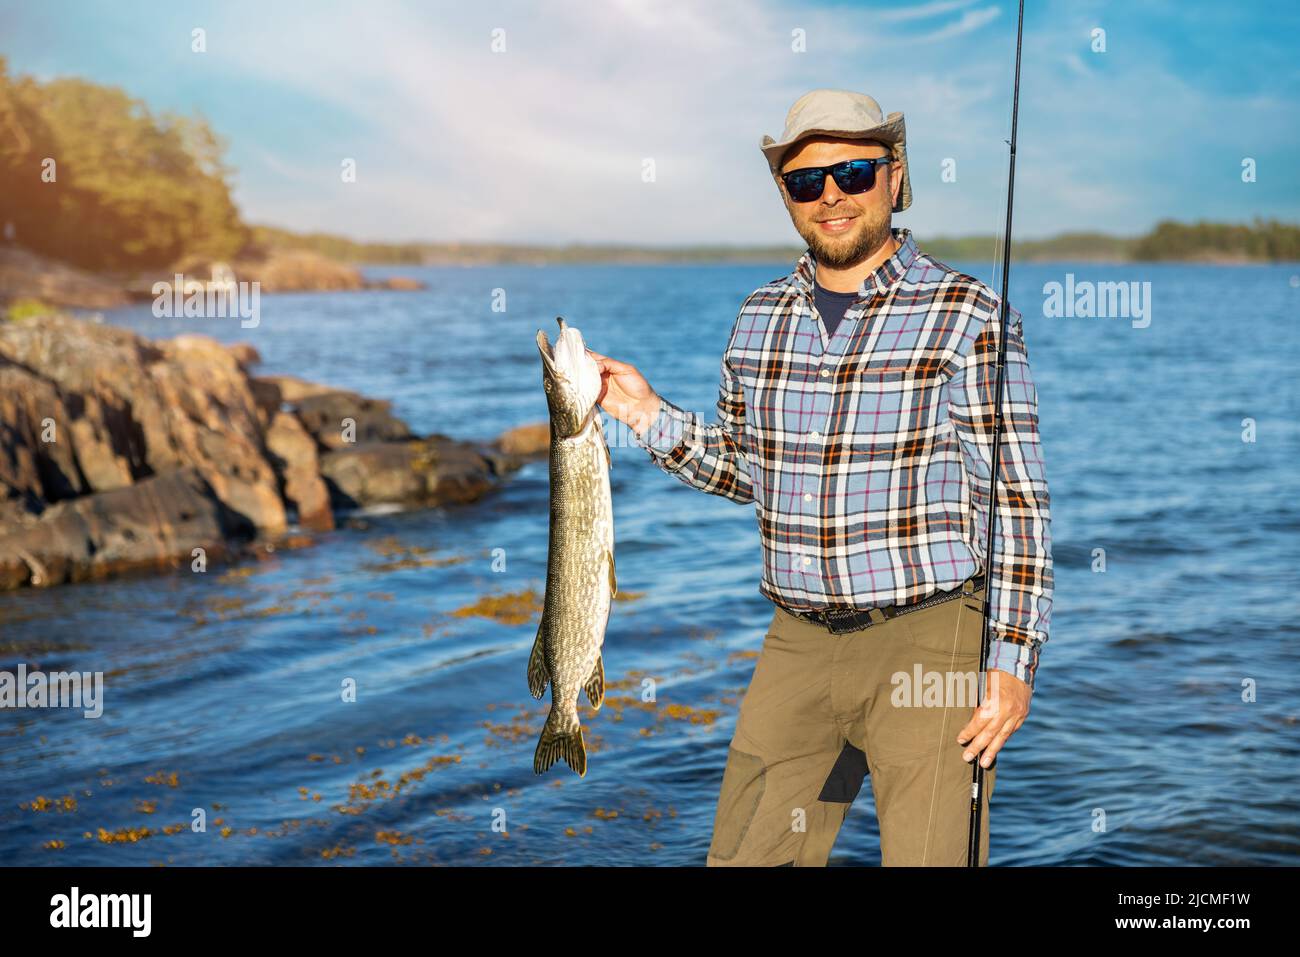 smiling fisherman with caught pike fish in hand Stock Photo